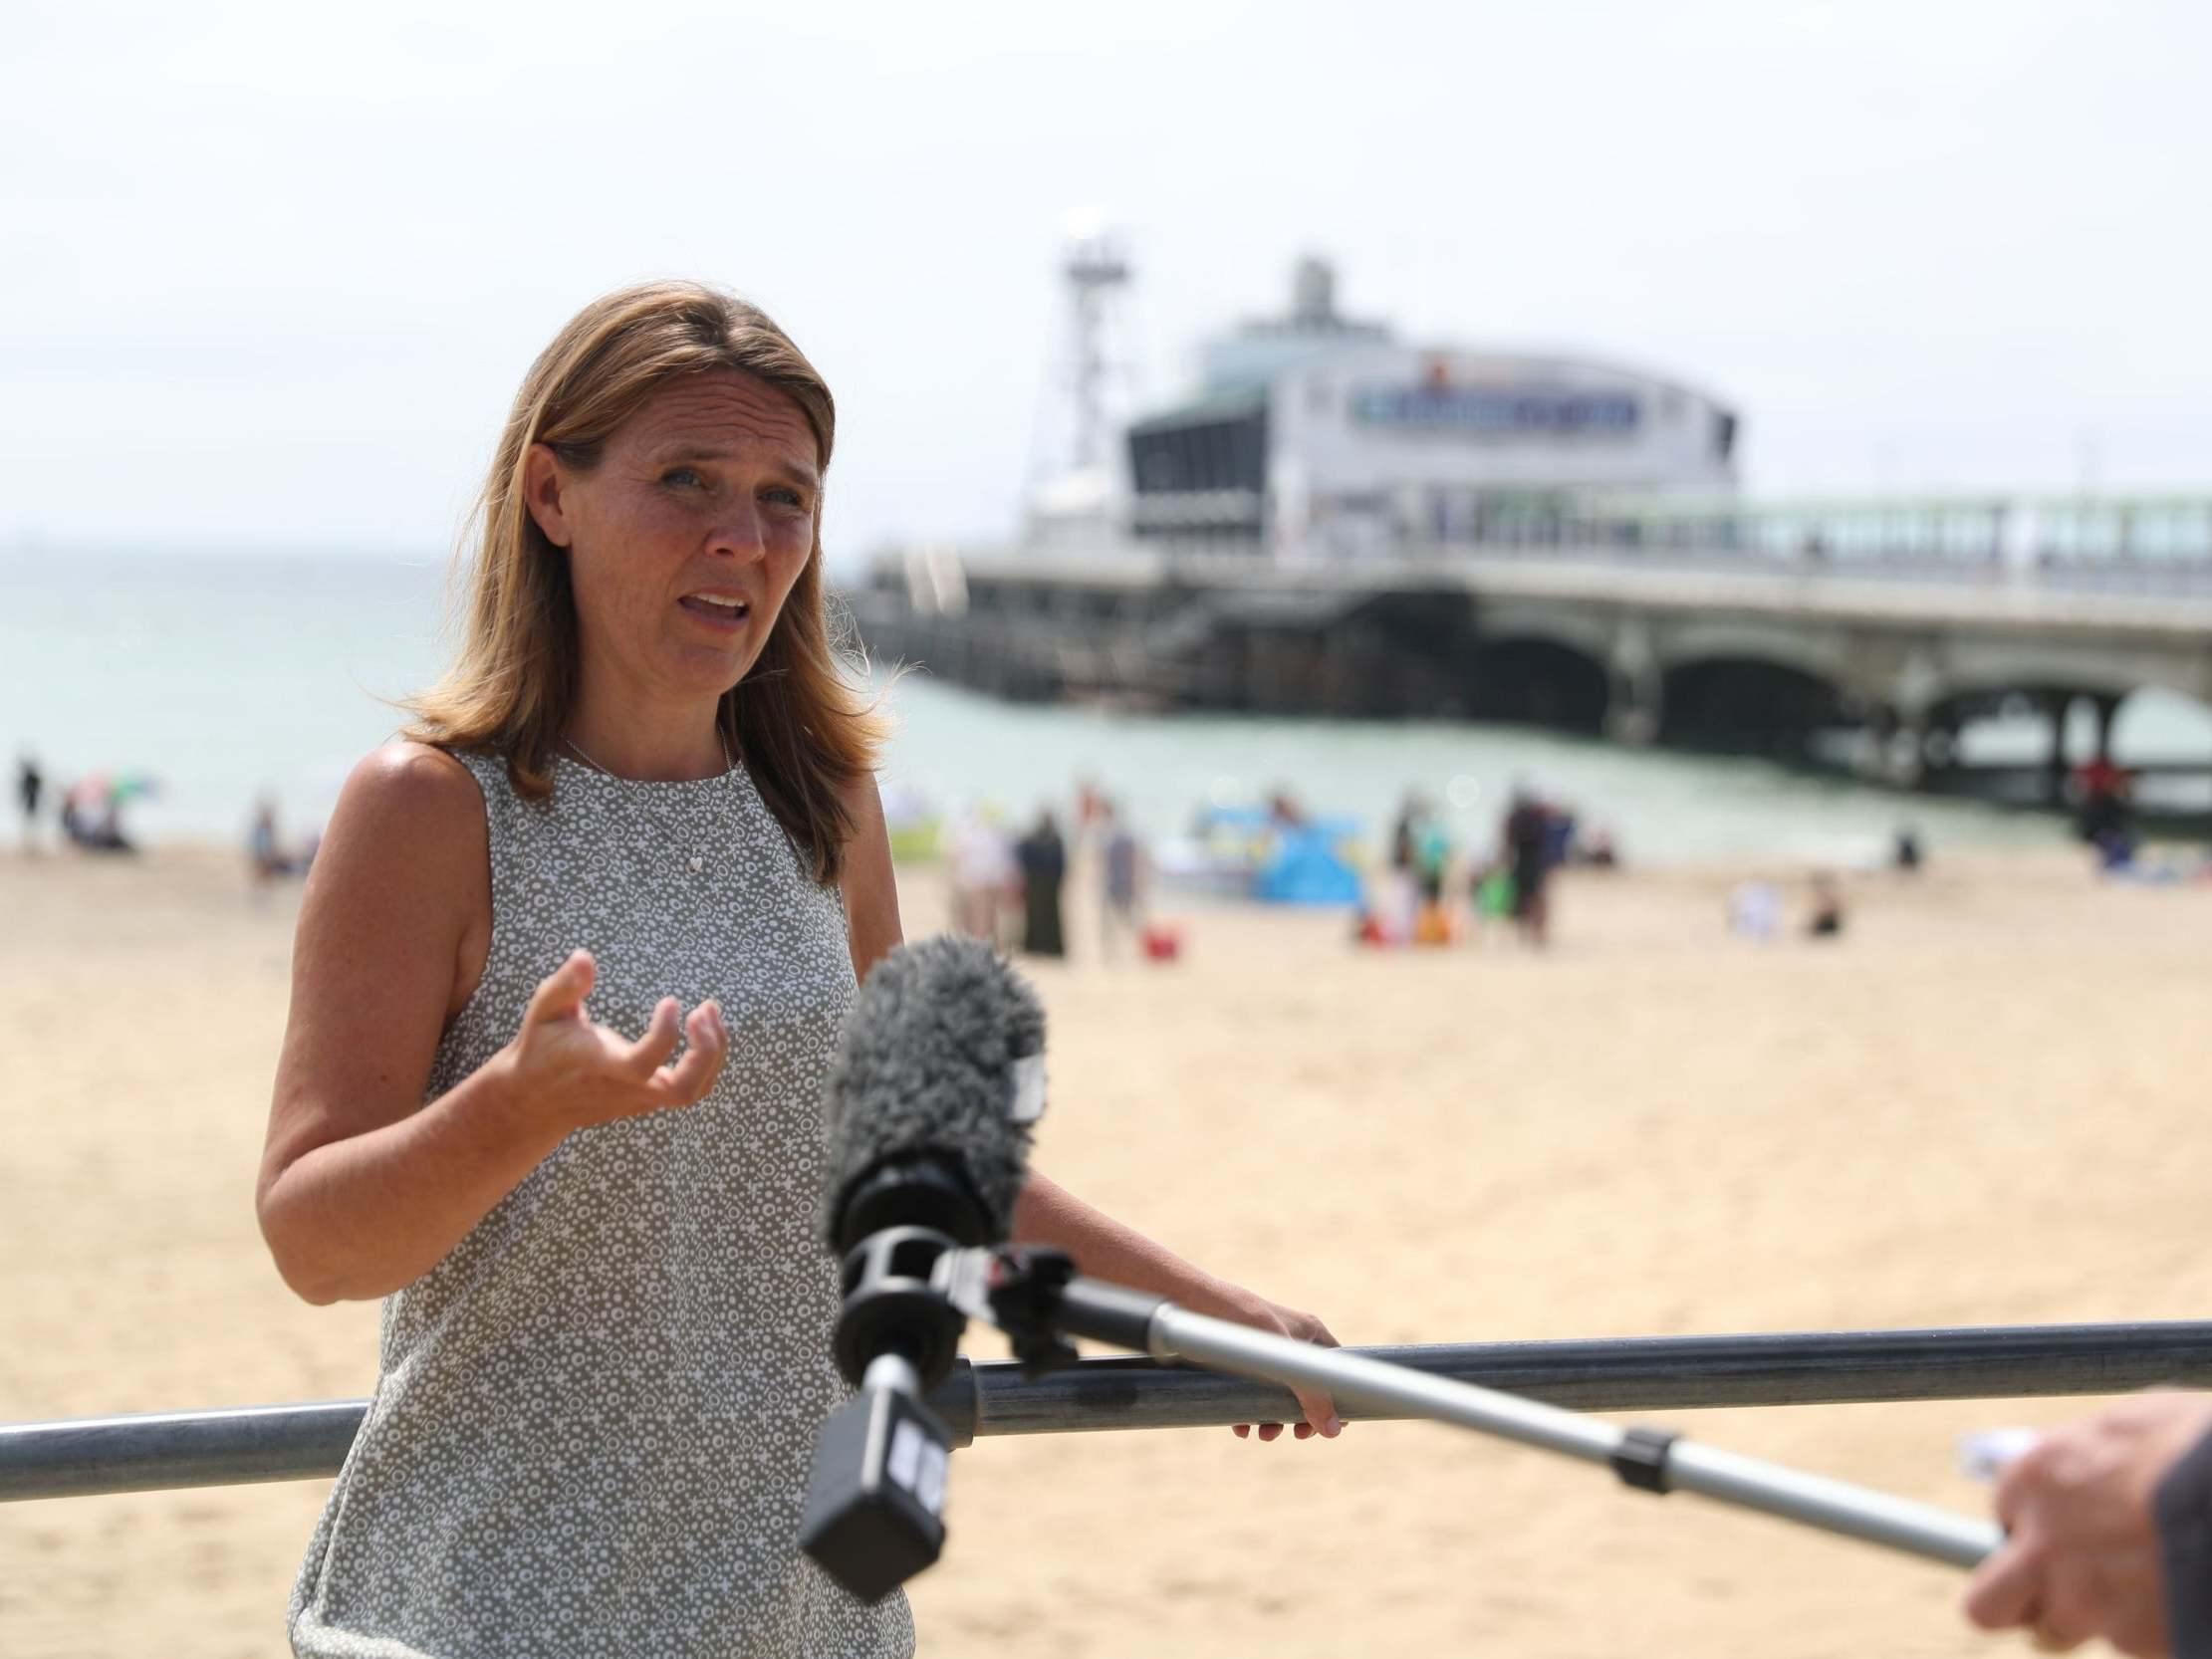 Vikki Slade, leader of Bournemouth, Christchurch and Poole Council, gives a video interview as people relax on the beach near Bournemouth Pier where three men were stabbed, 26 June 2020.